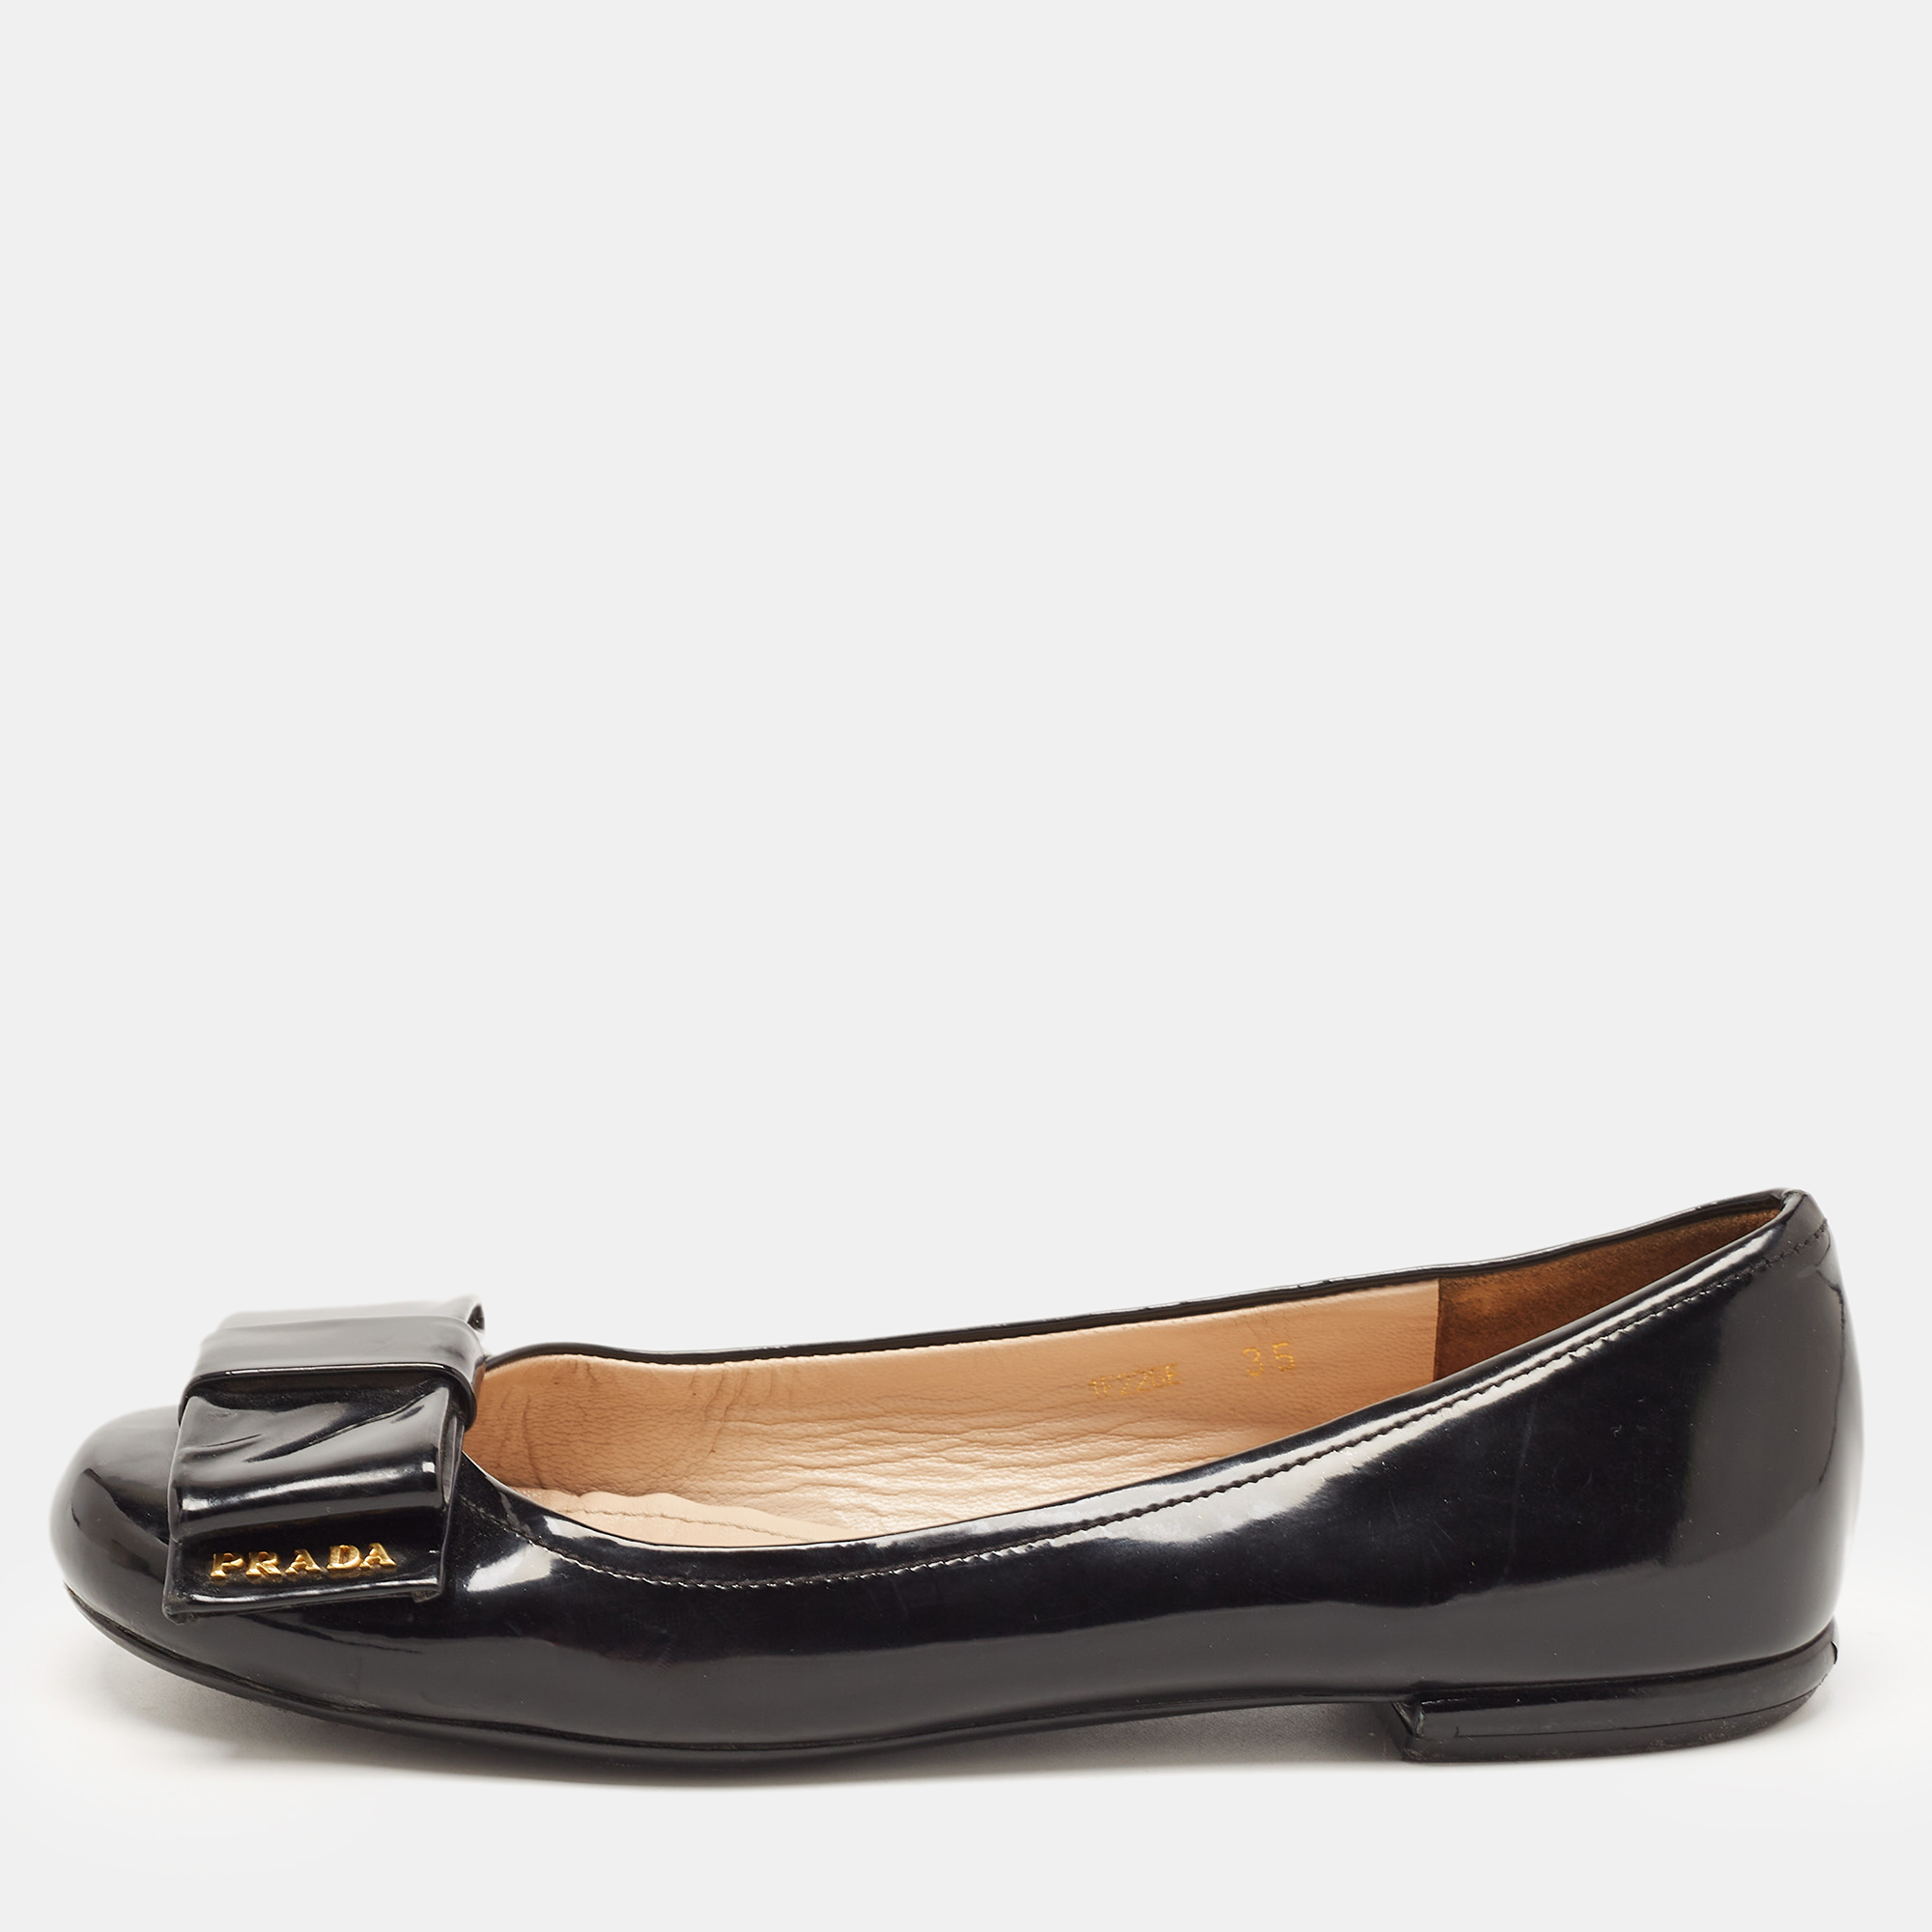 Pre-owned Prada Black Patent Leather Bow Ballet Flats Size 35